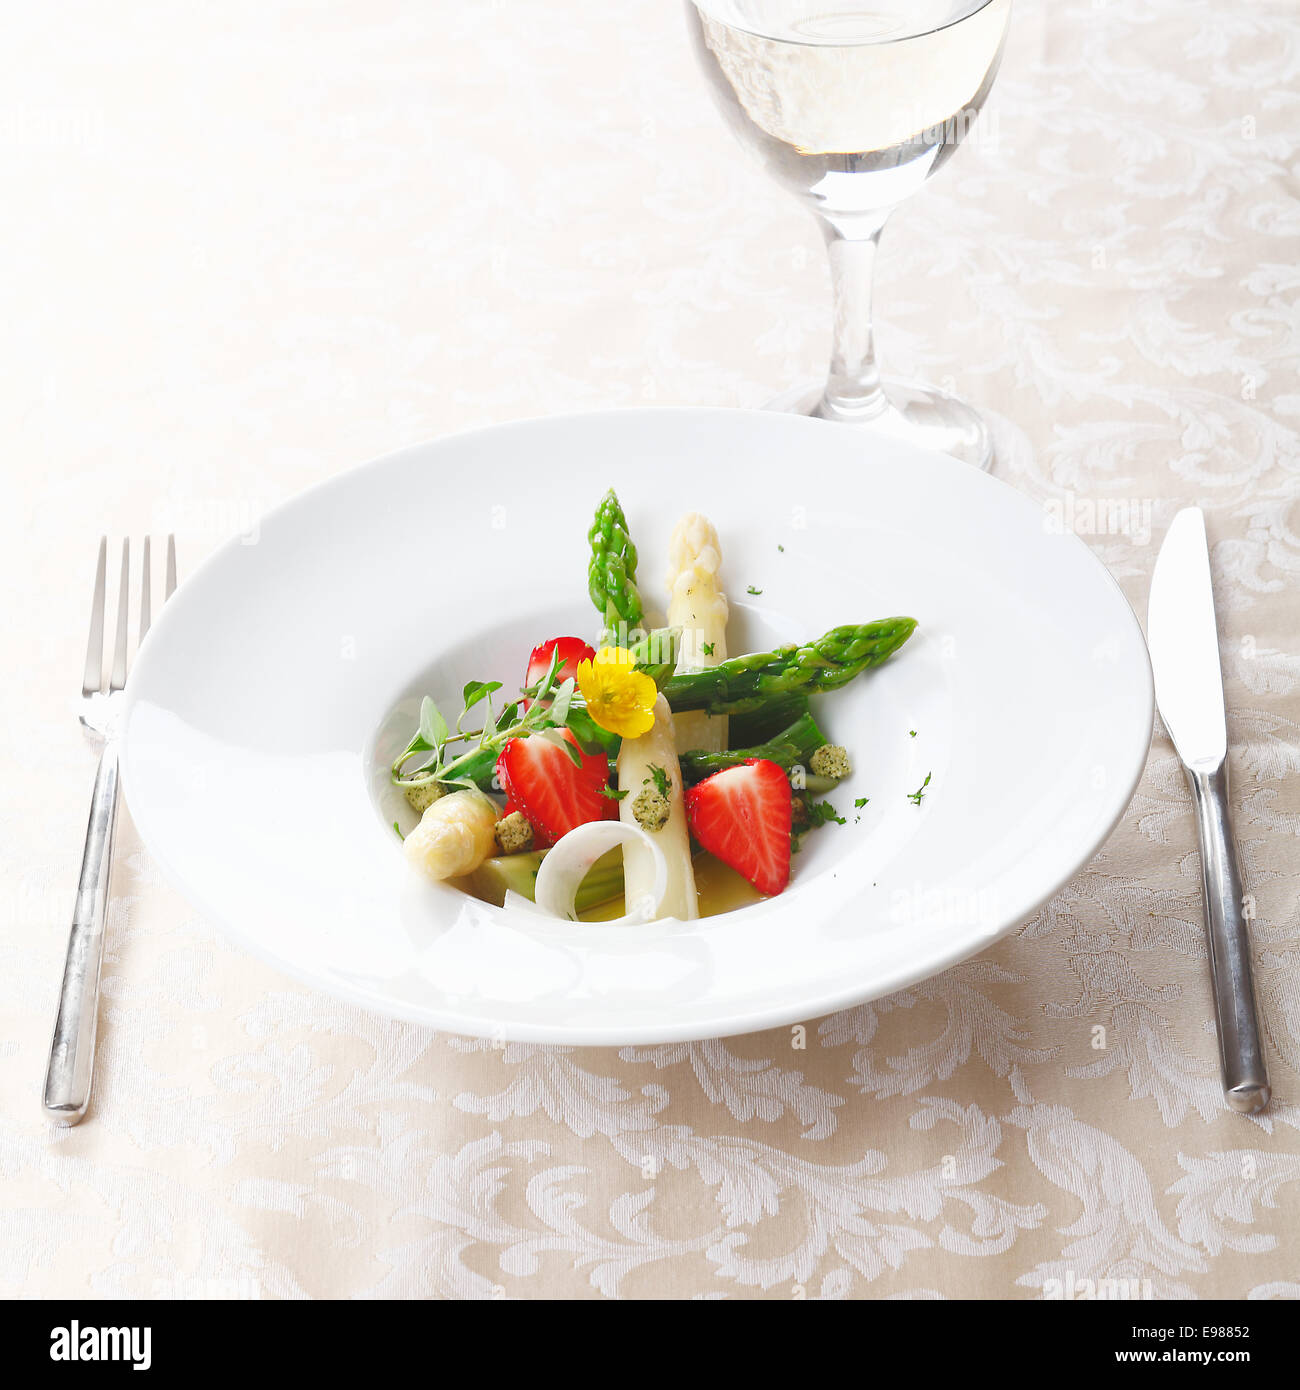 Healthy strawberry and asparagus salad with succulent green and white asparagus tips and sliced ripe red strawberries served in Stock Photo